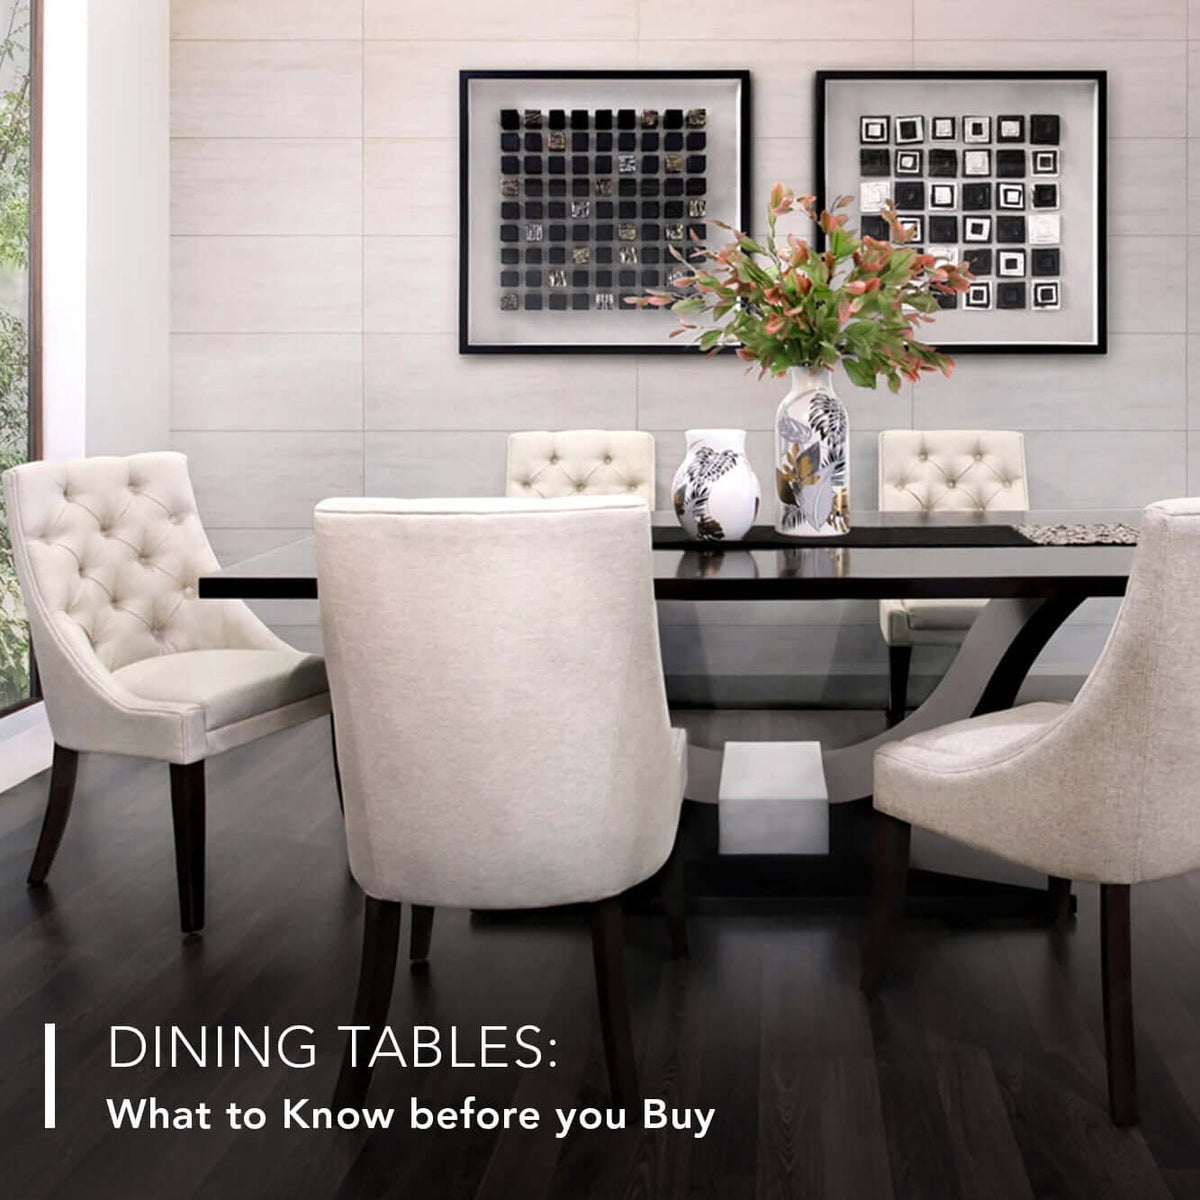 Dining Tables: What to Know before you Buy